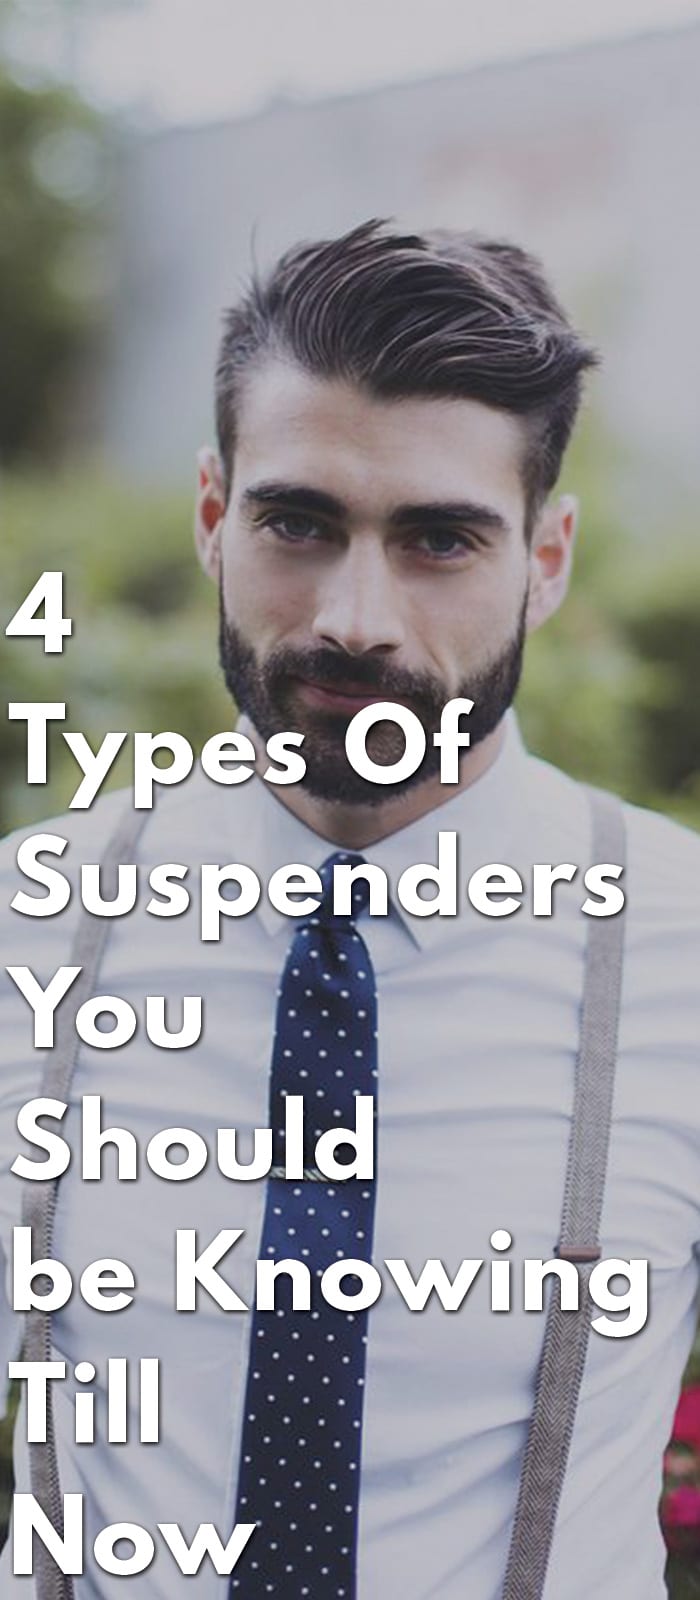 4-Types-Of-Suspenders-You-Should-be-Knowing-Till-Now